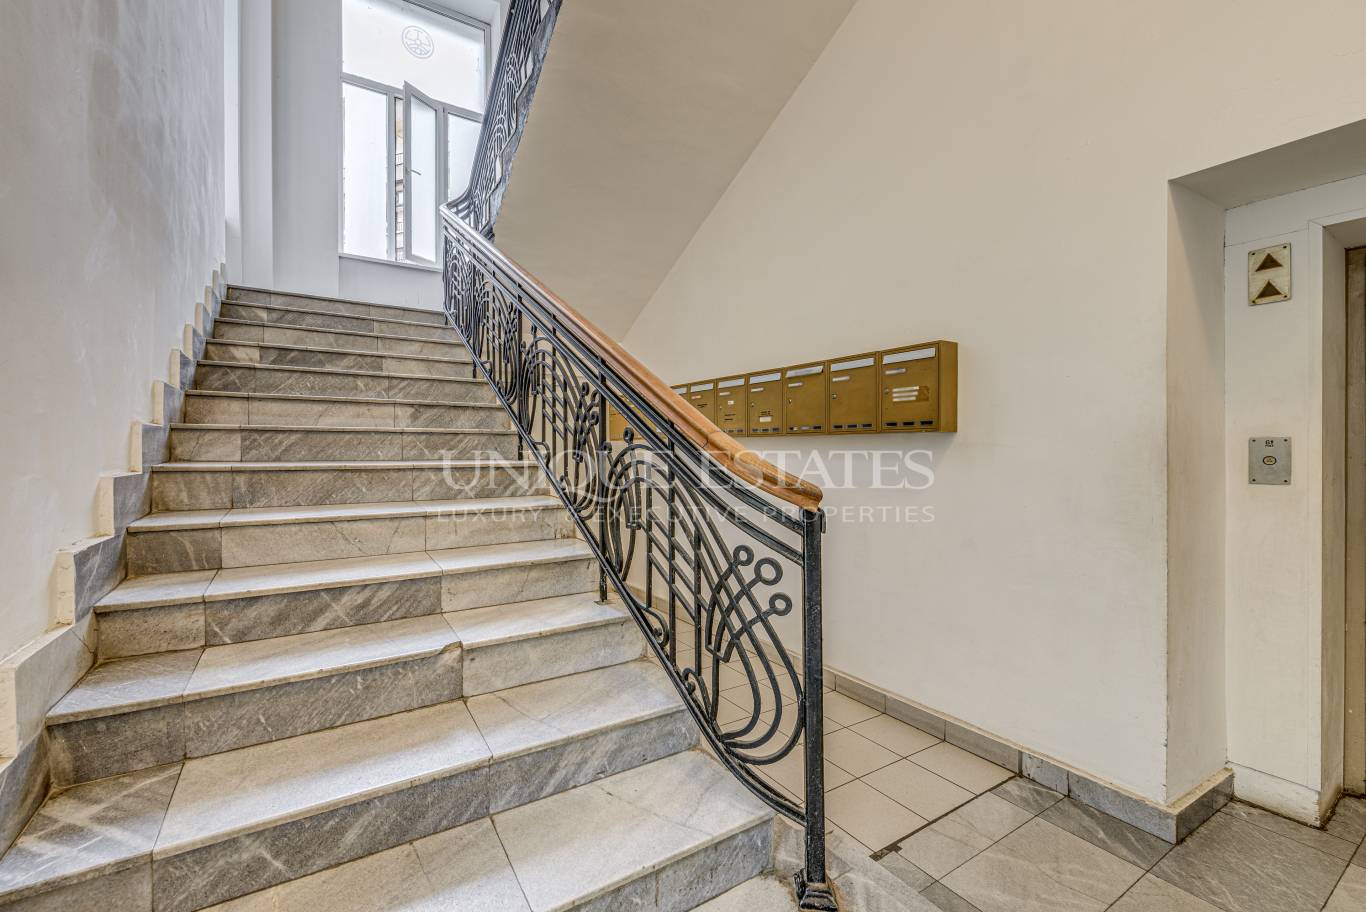 Office for rent in Sofia, Downtown with listing ID: K4831 - image 1